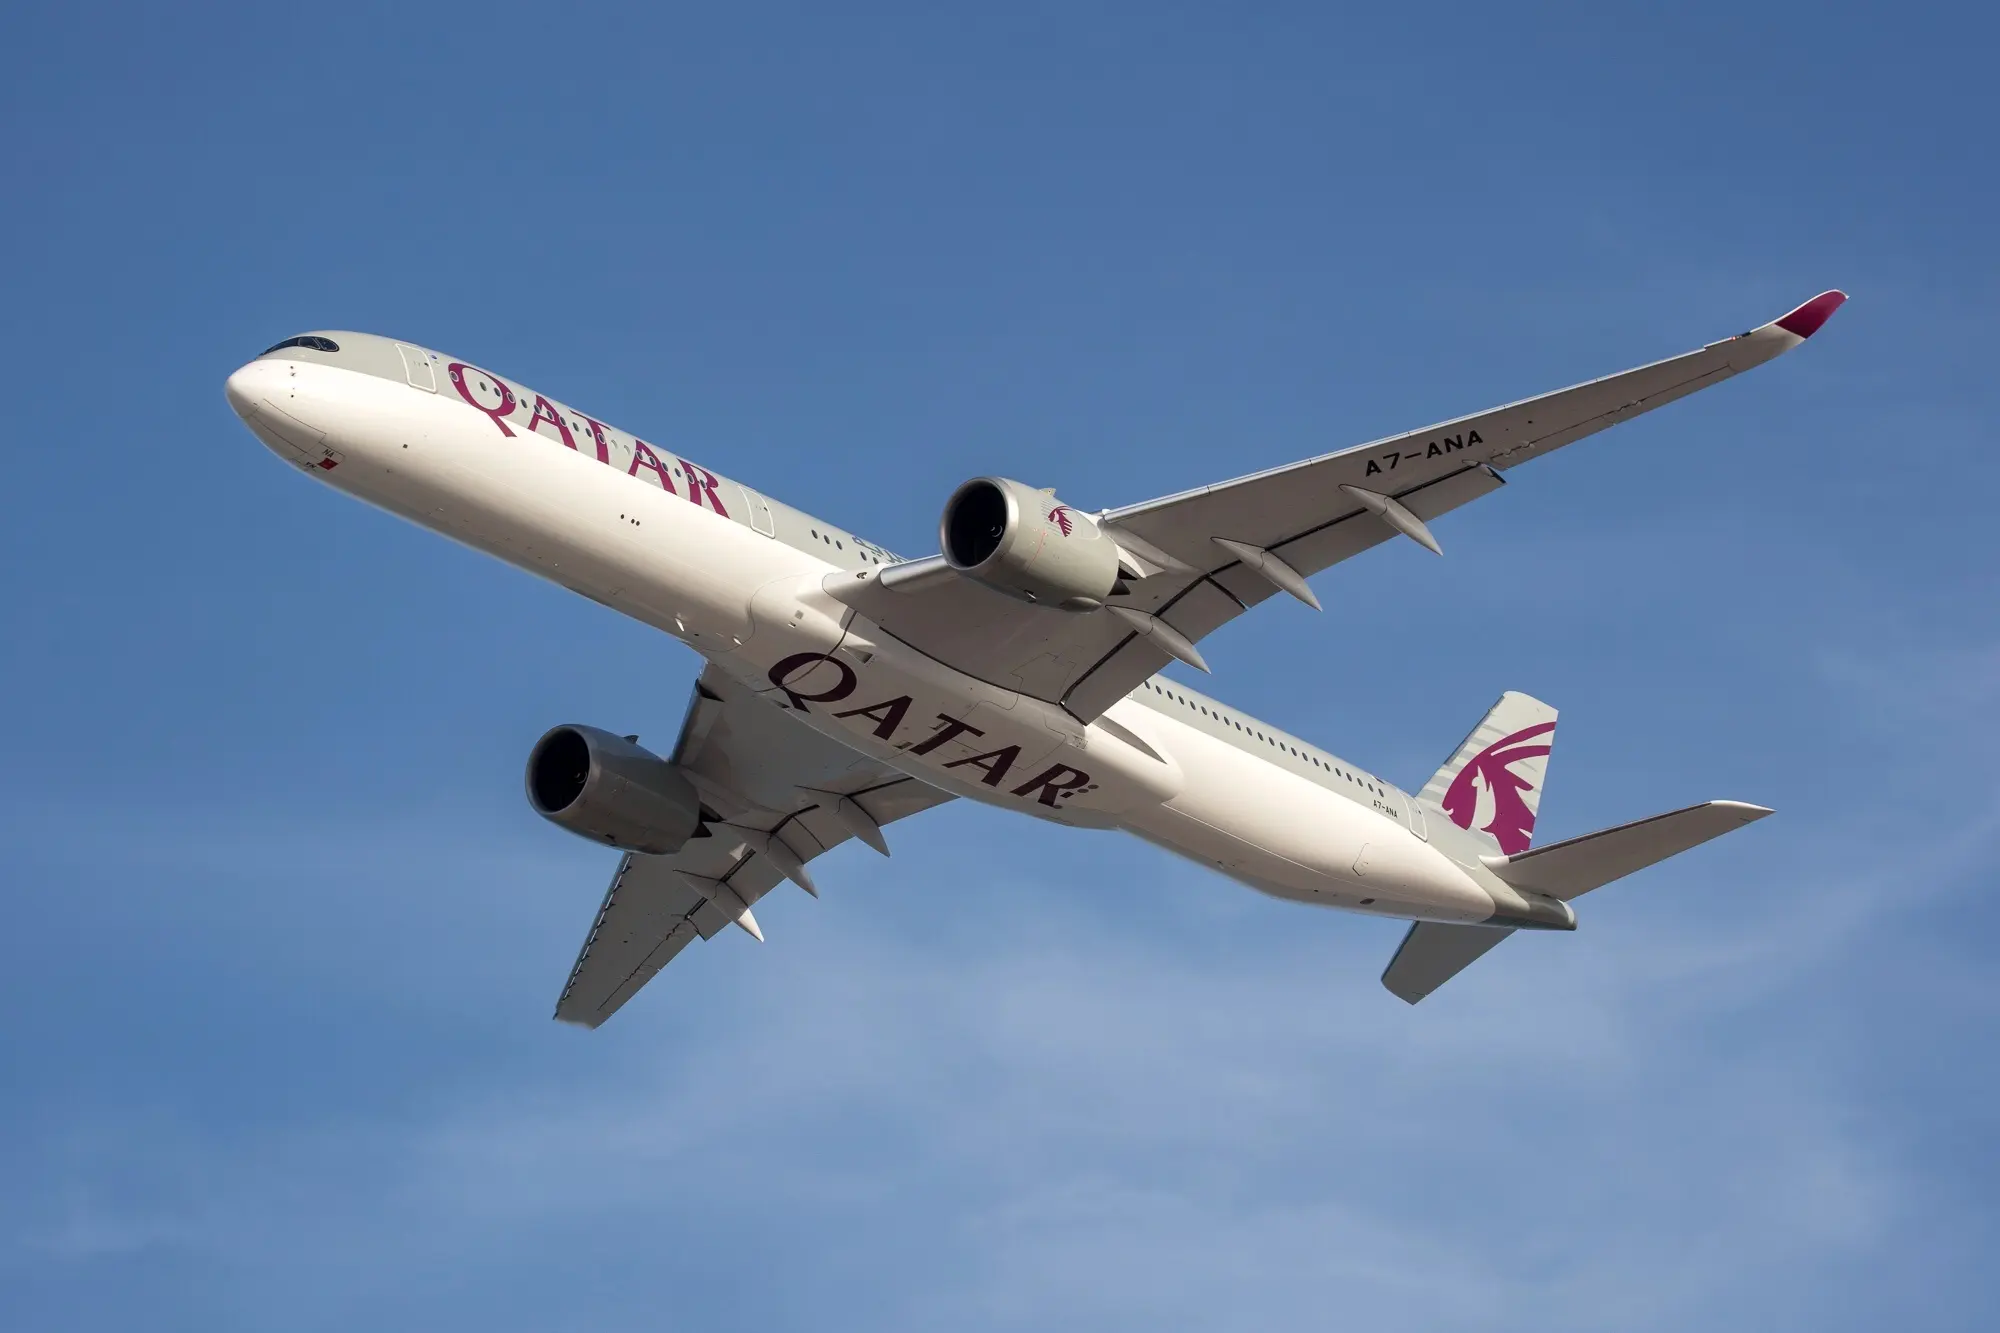 Qatar Airways welcomed its 53rd Airbus A350 on the last day of 2020 and remains the largest A350 operator